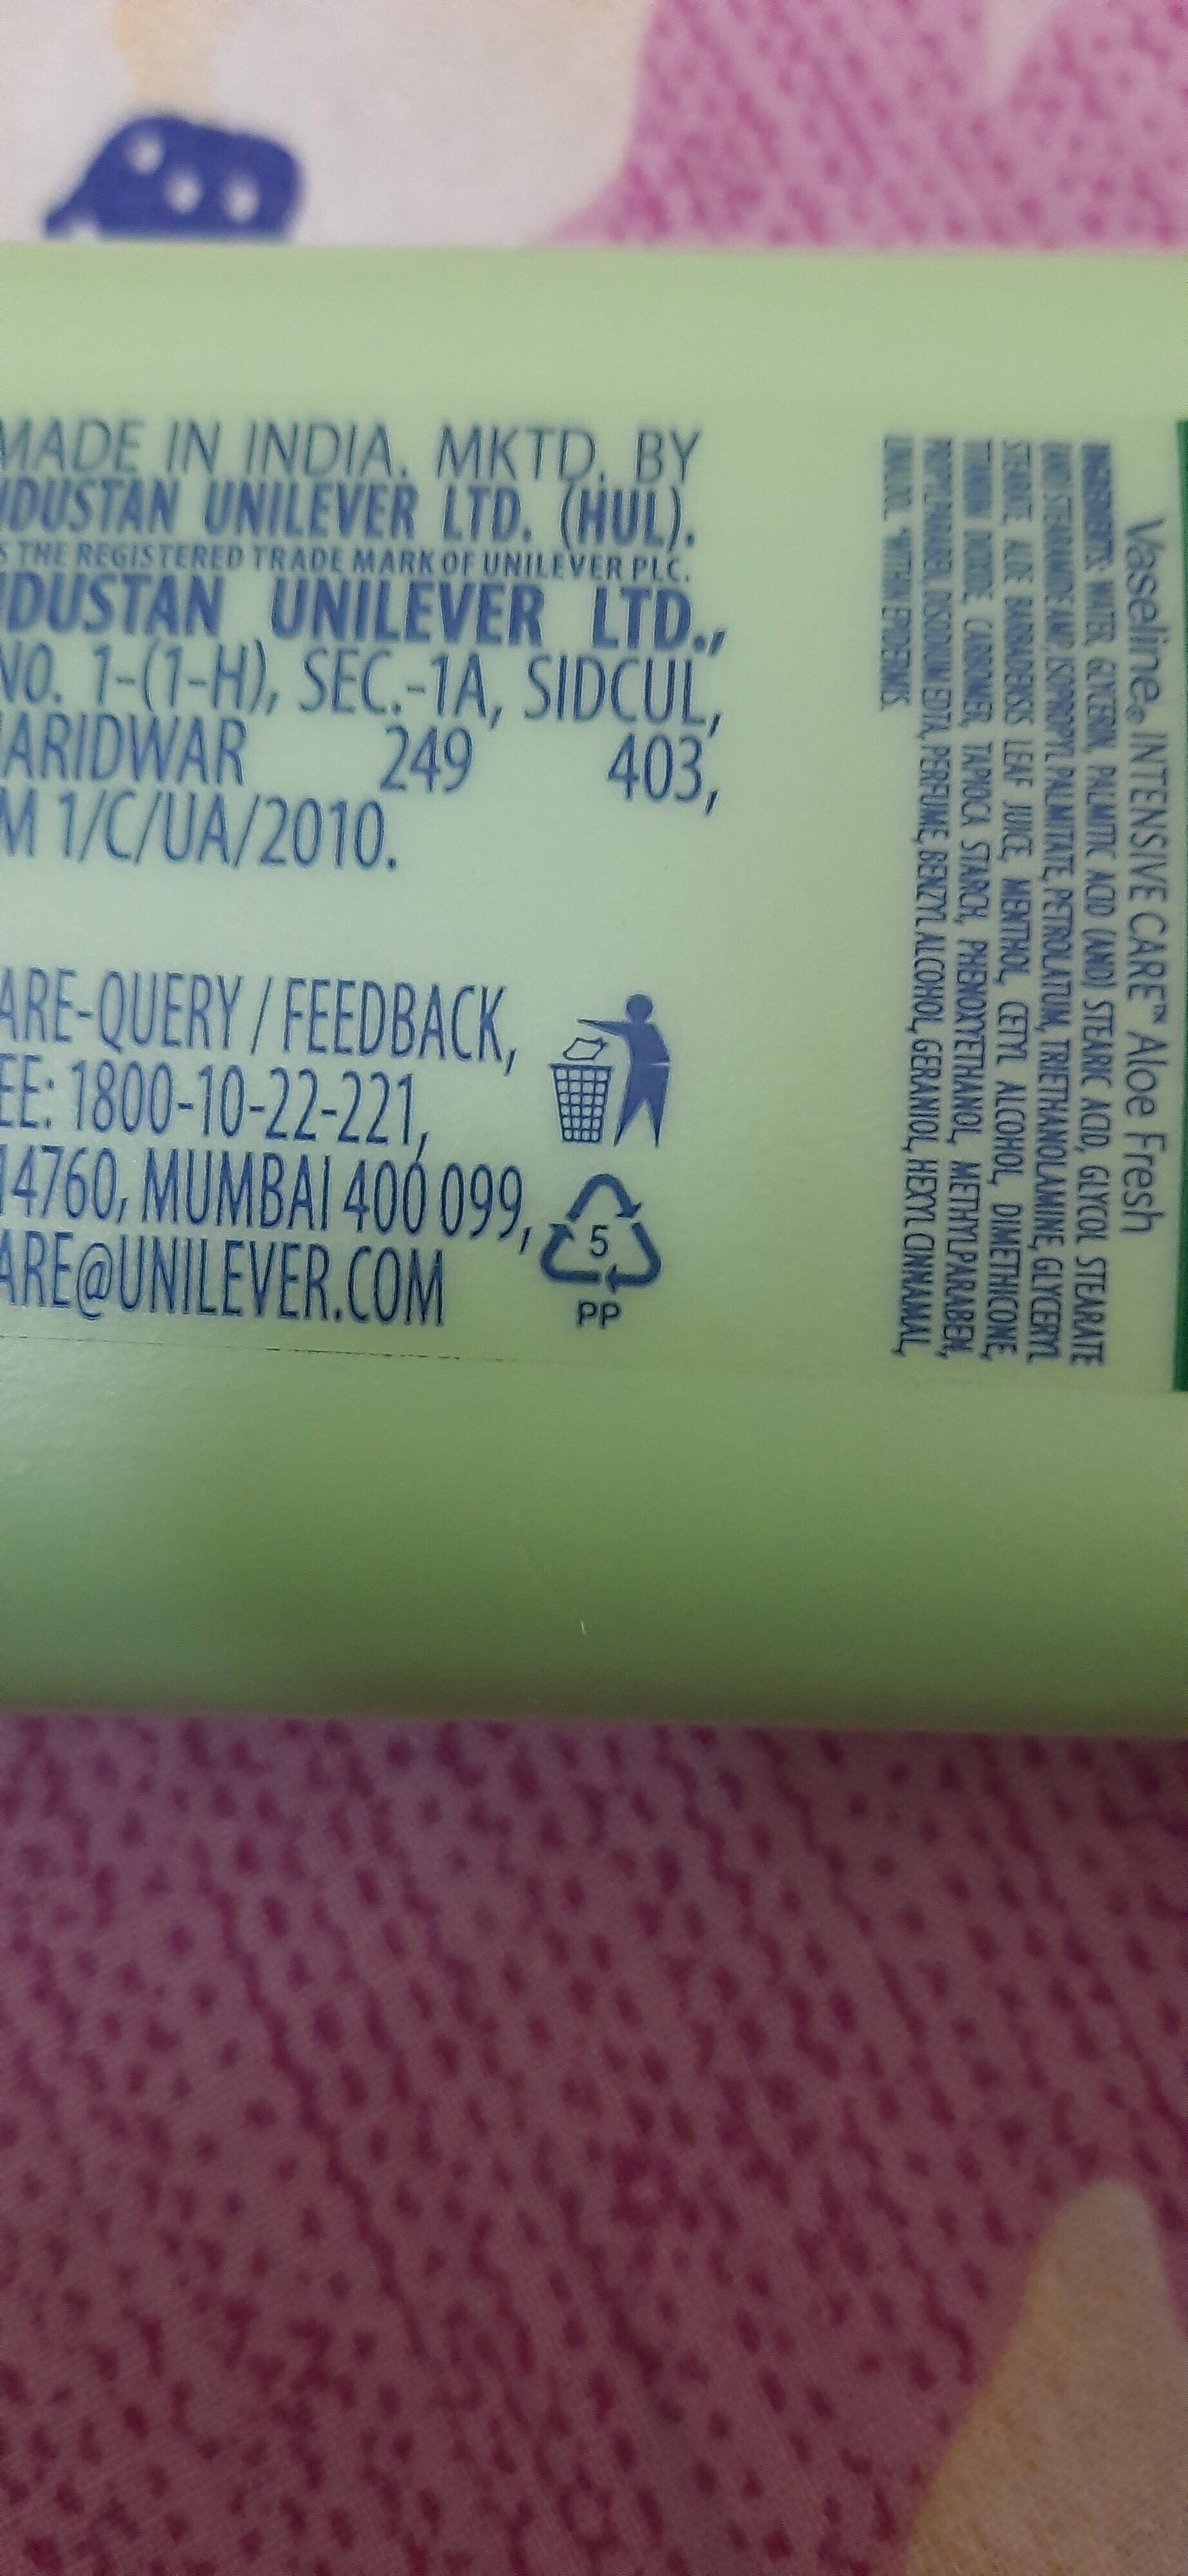  - Recycling instructions and/or packaging information - en